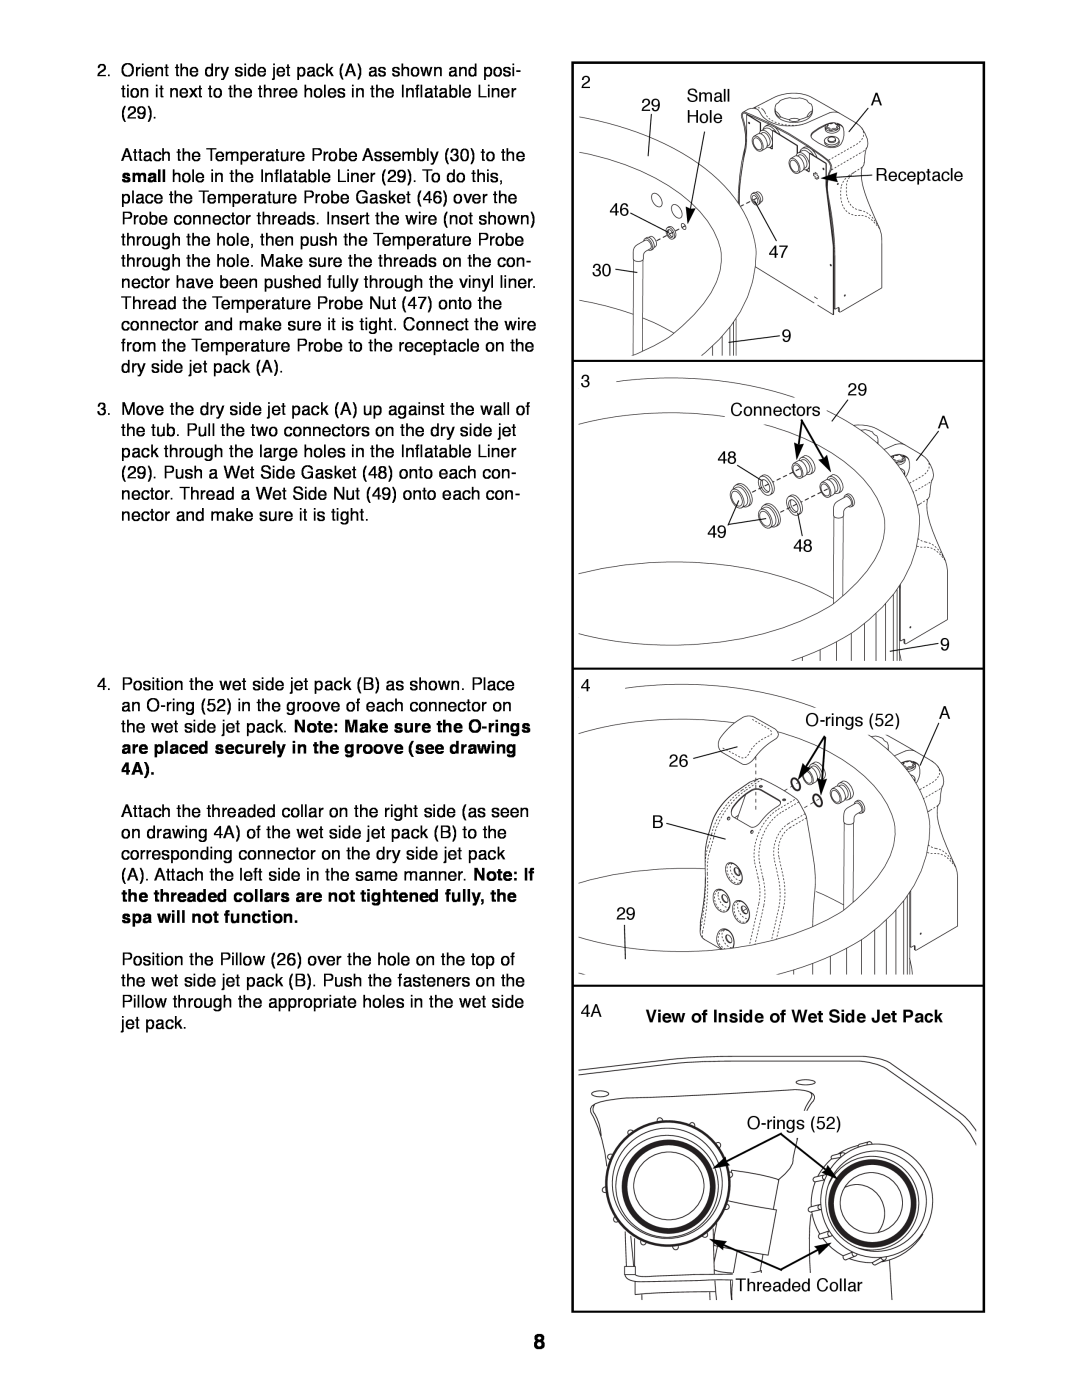 Image IMHS81590 manual View of Inside of Wet Side Jet Pack 